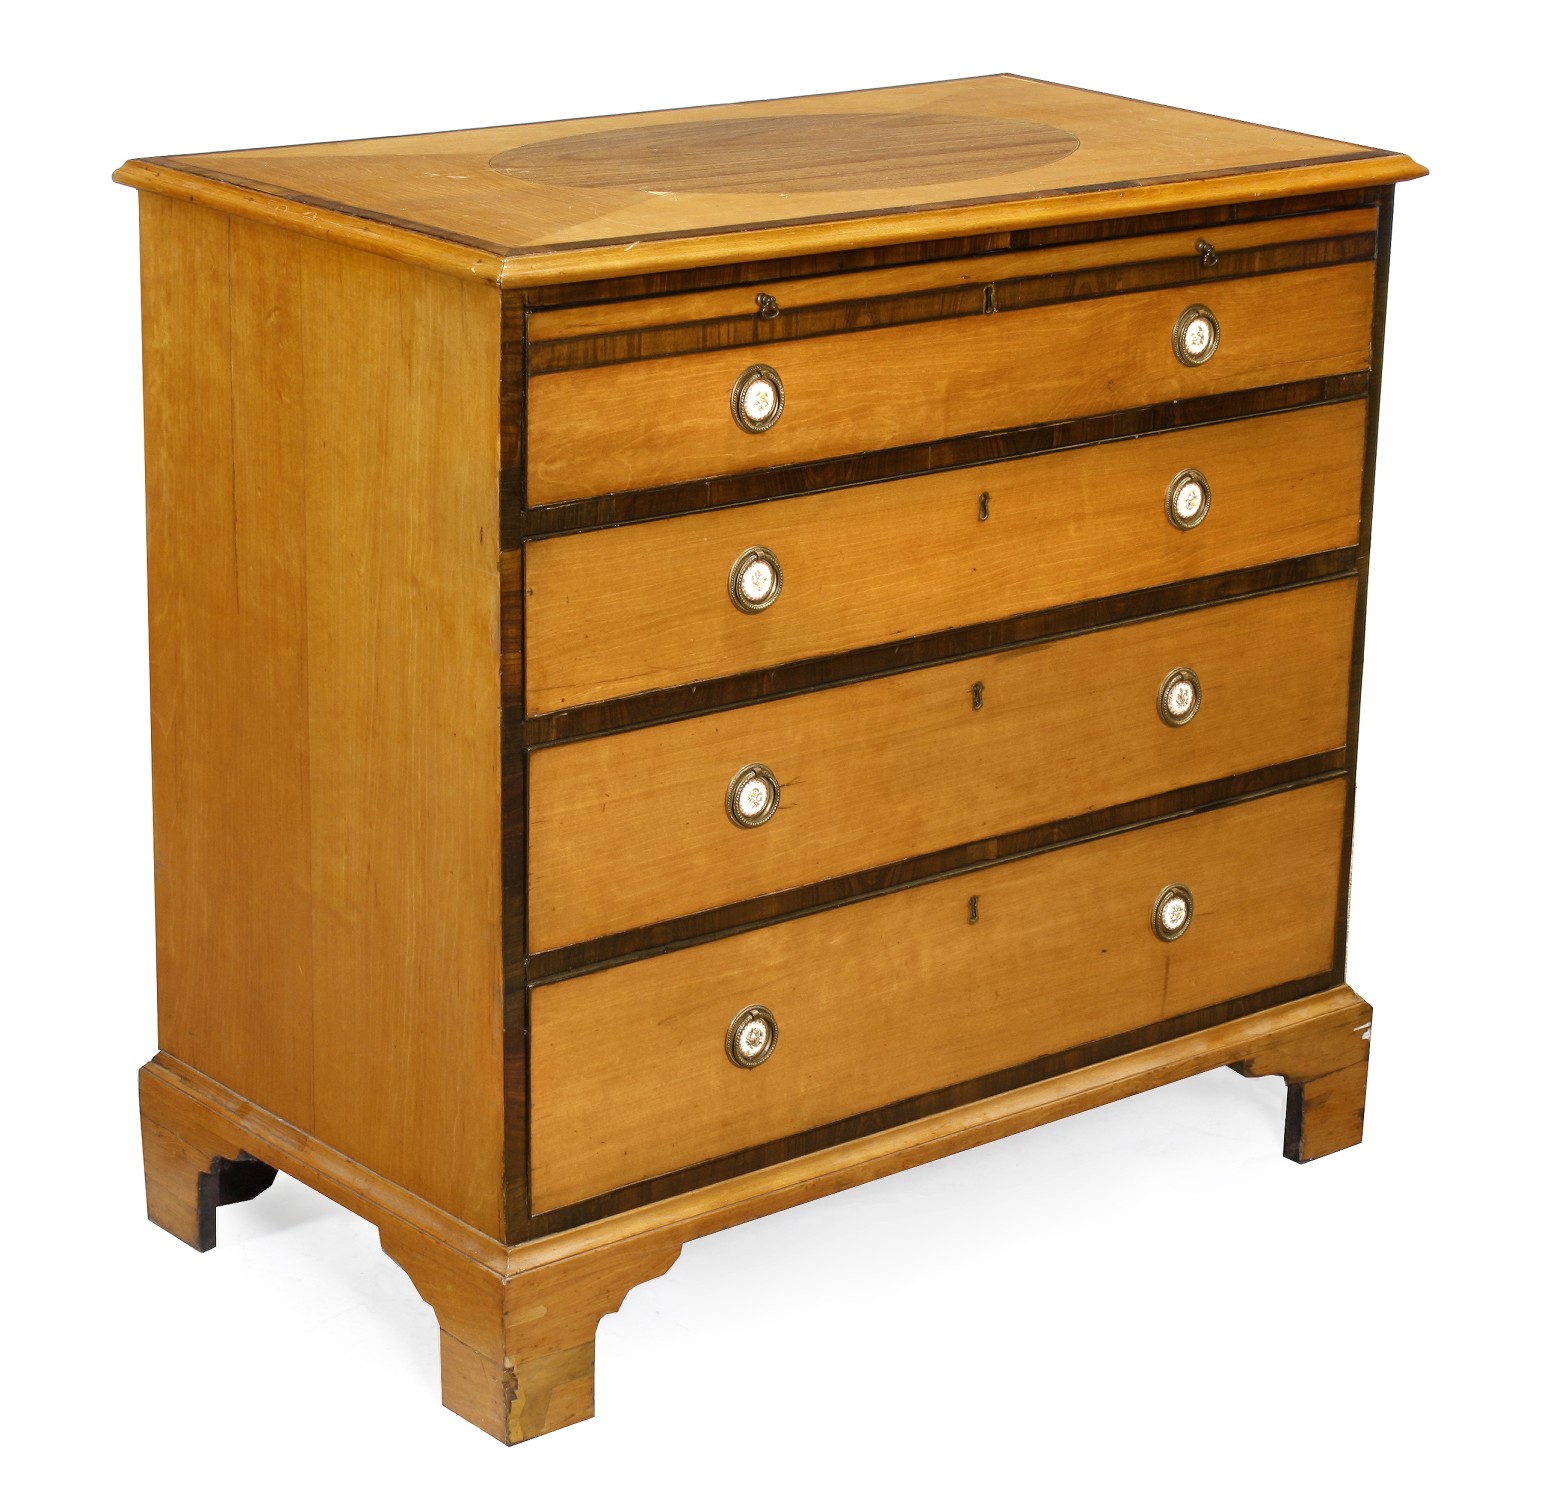 A George III satinwood and banded chest of drawers, circa 1800, in the manner of Gillows of